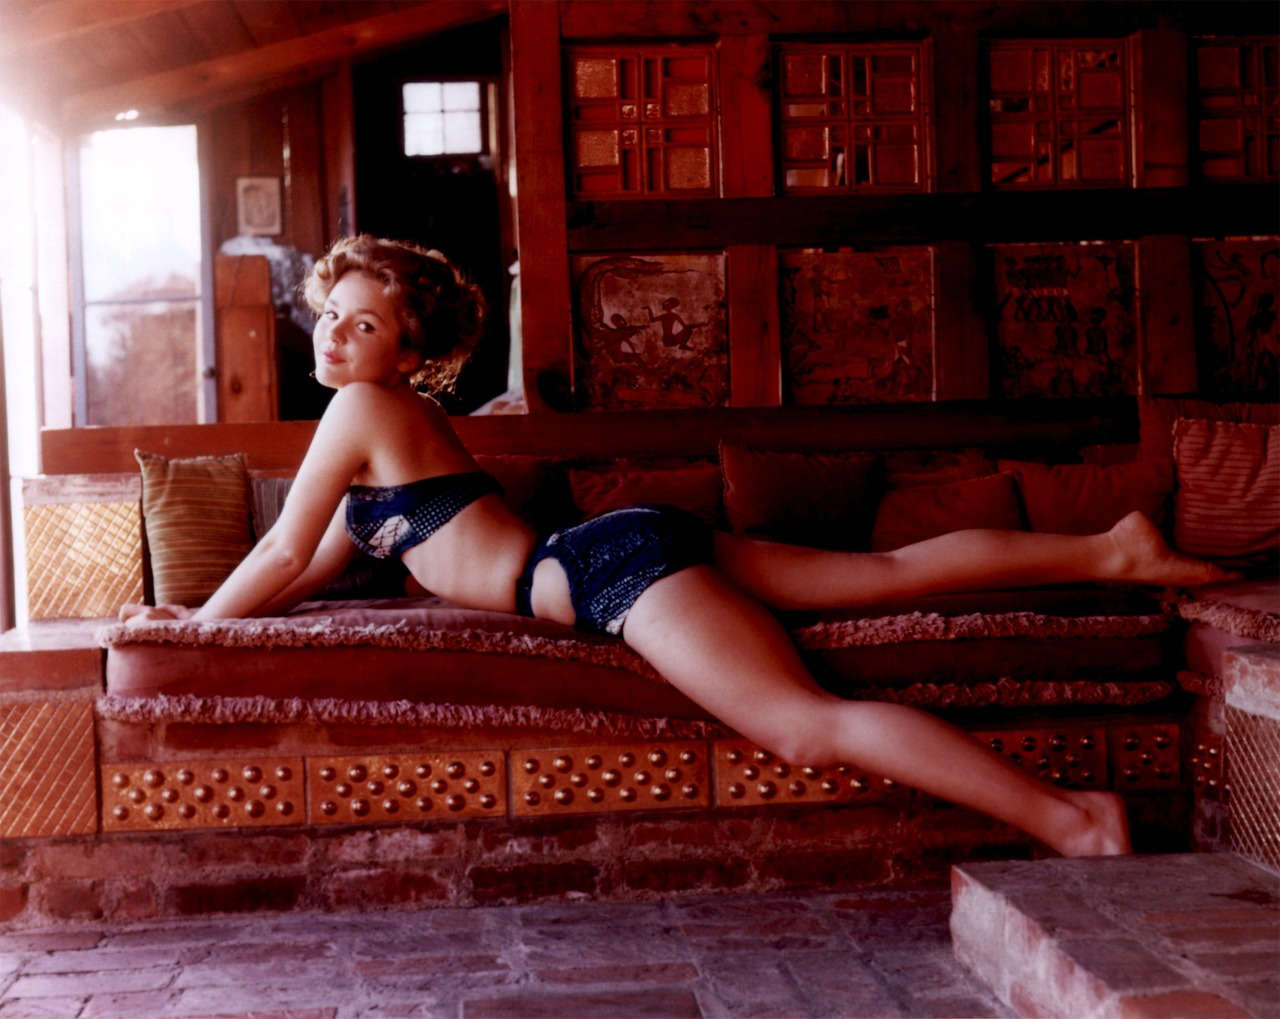 Tuesday Weld NSFW